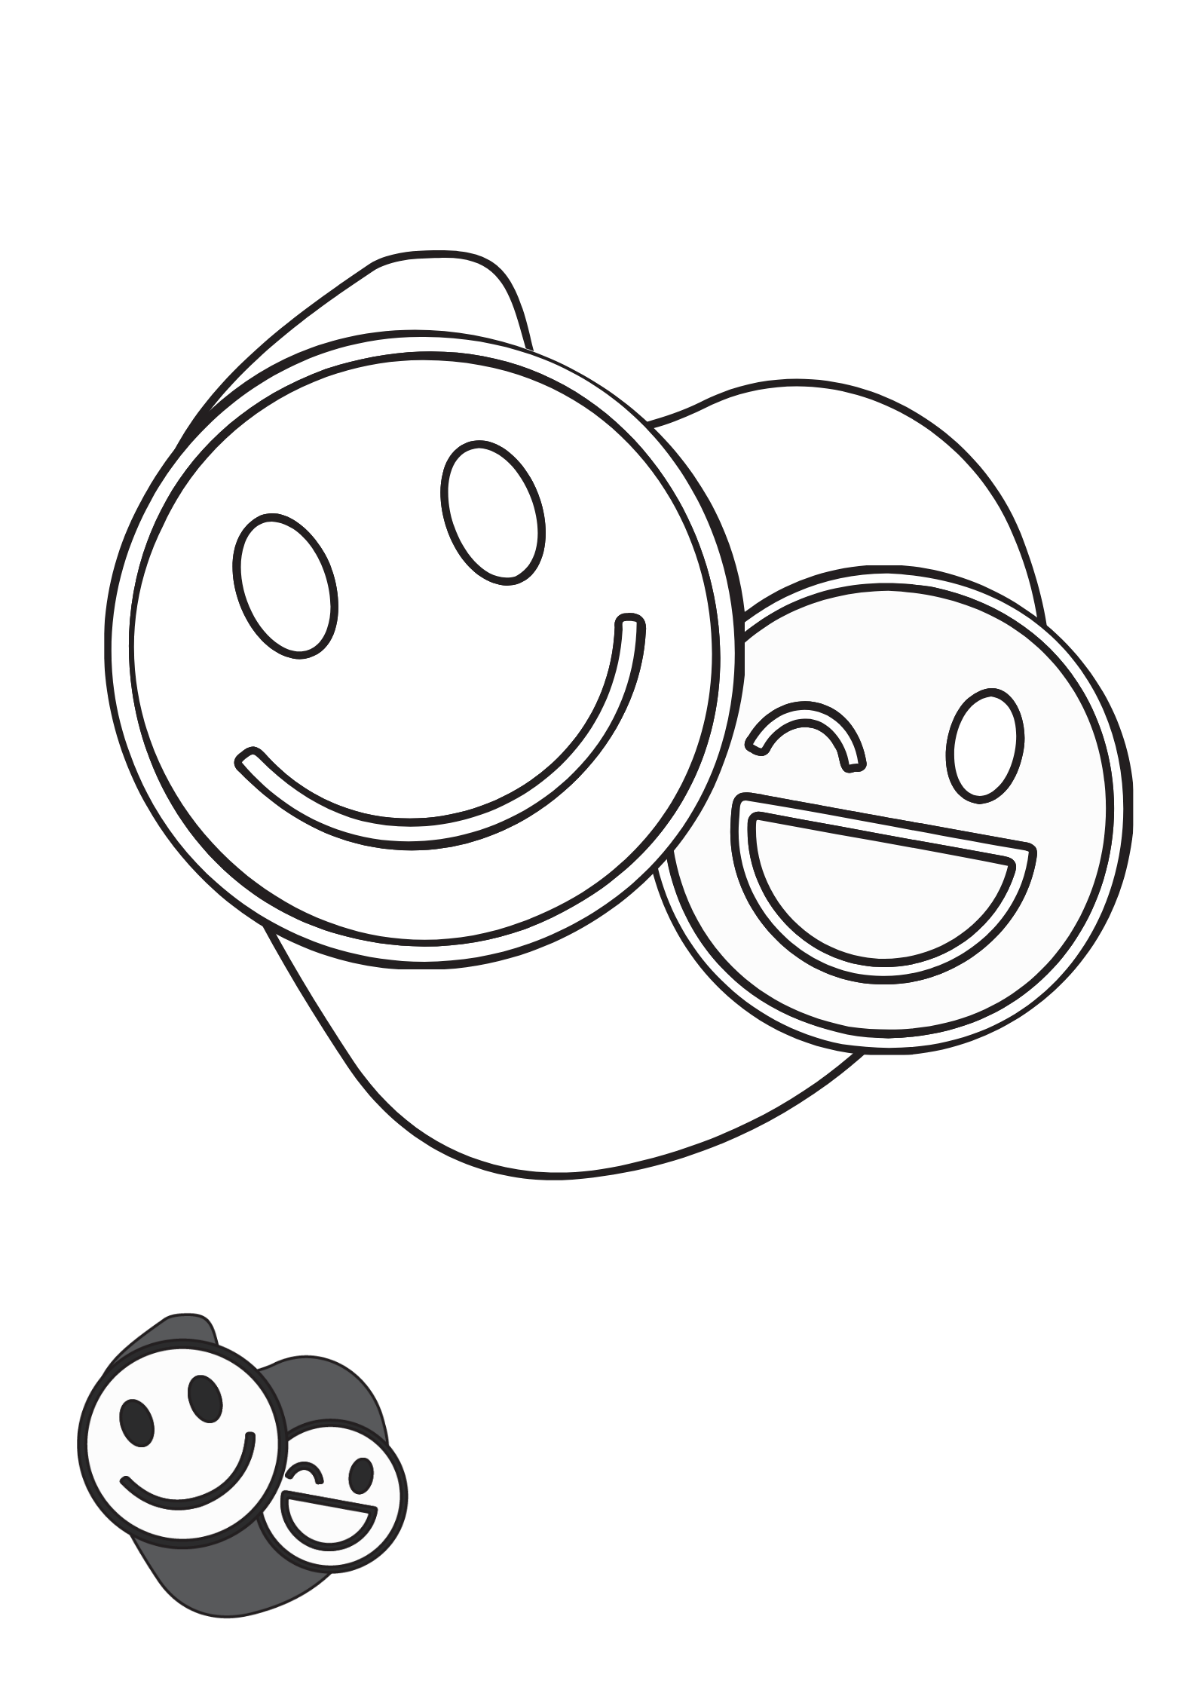 White Smiley coloring page